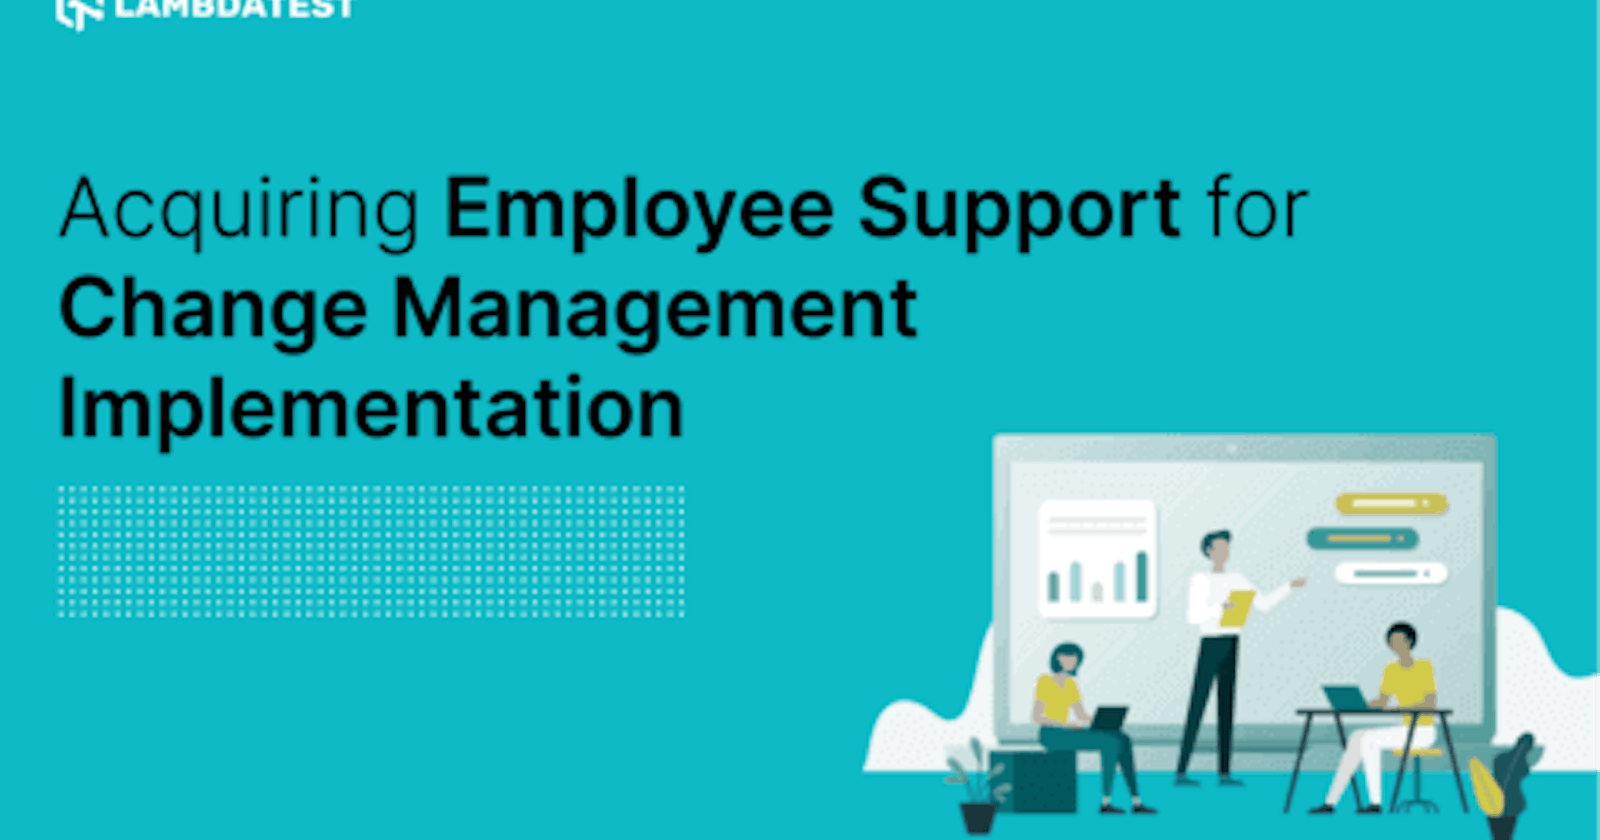 Acquiring Employee Support for Change Management Implementation